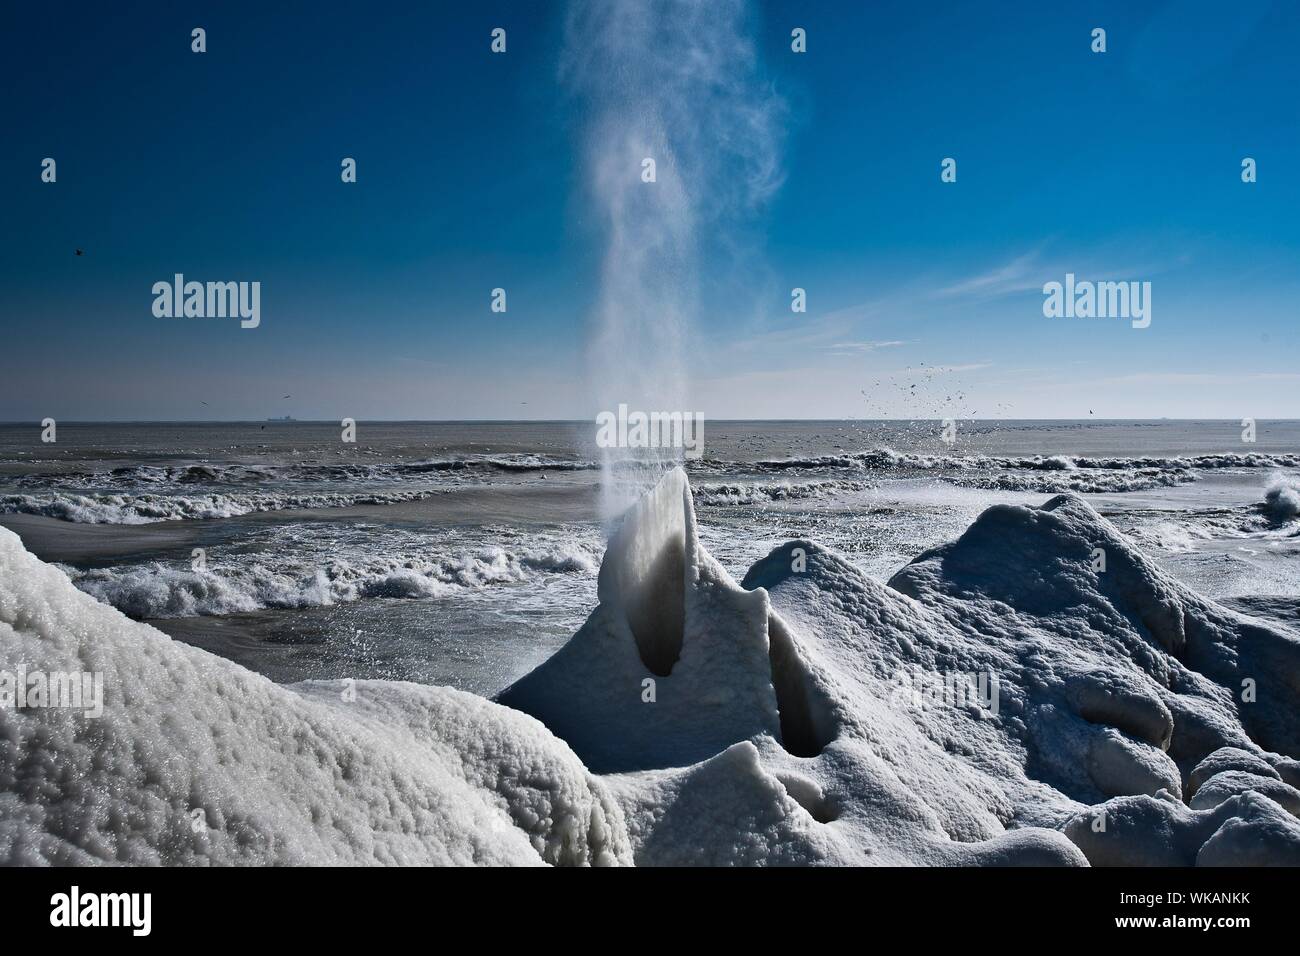 Steam Emitting From Hot Spring At Beach During Sunny Day Stock Photo